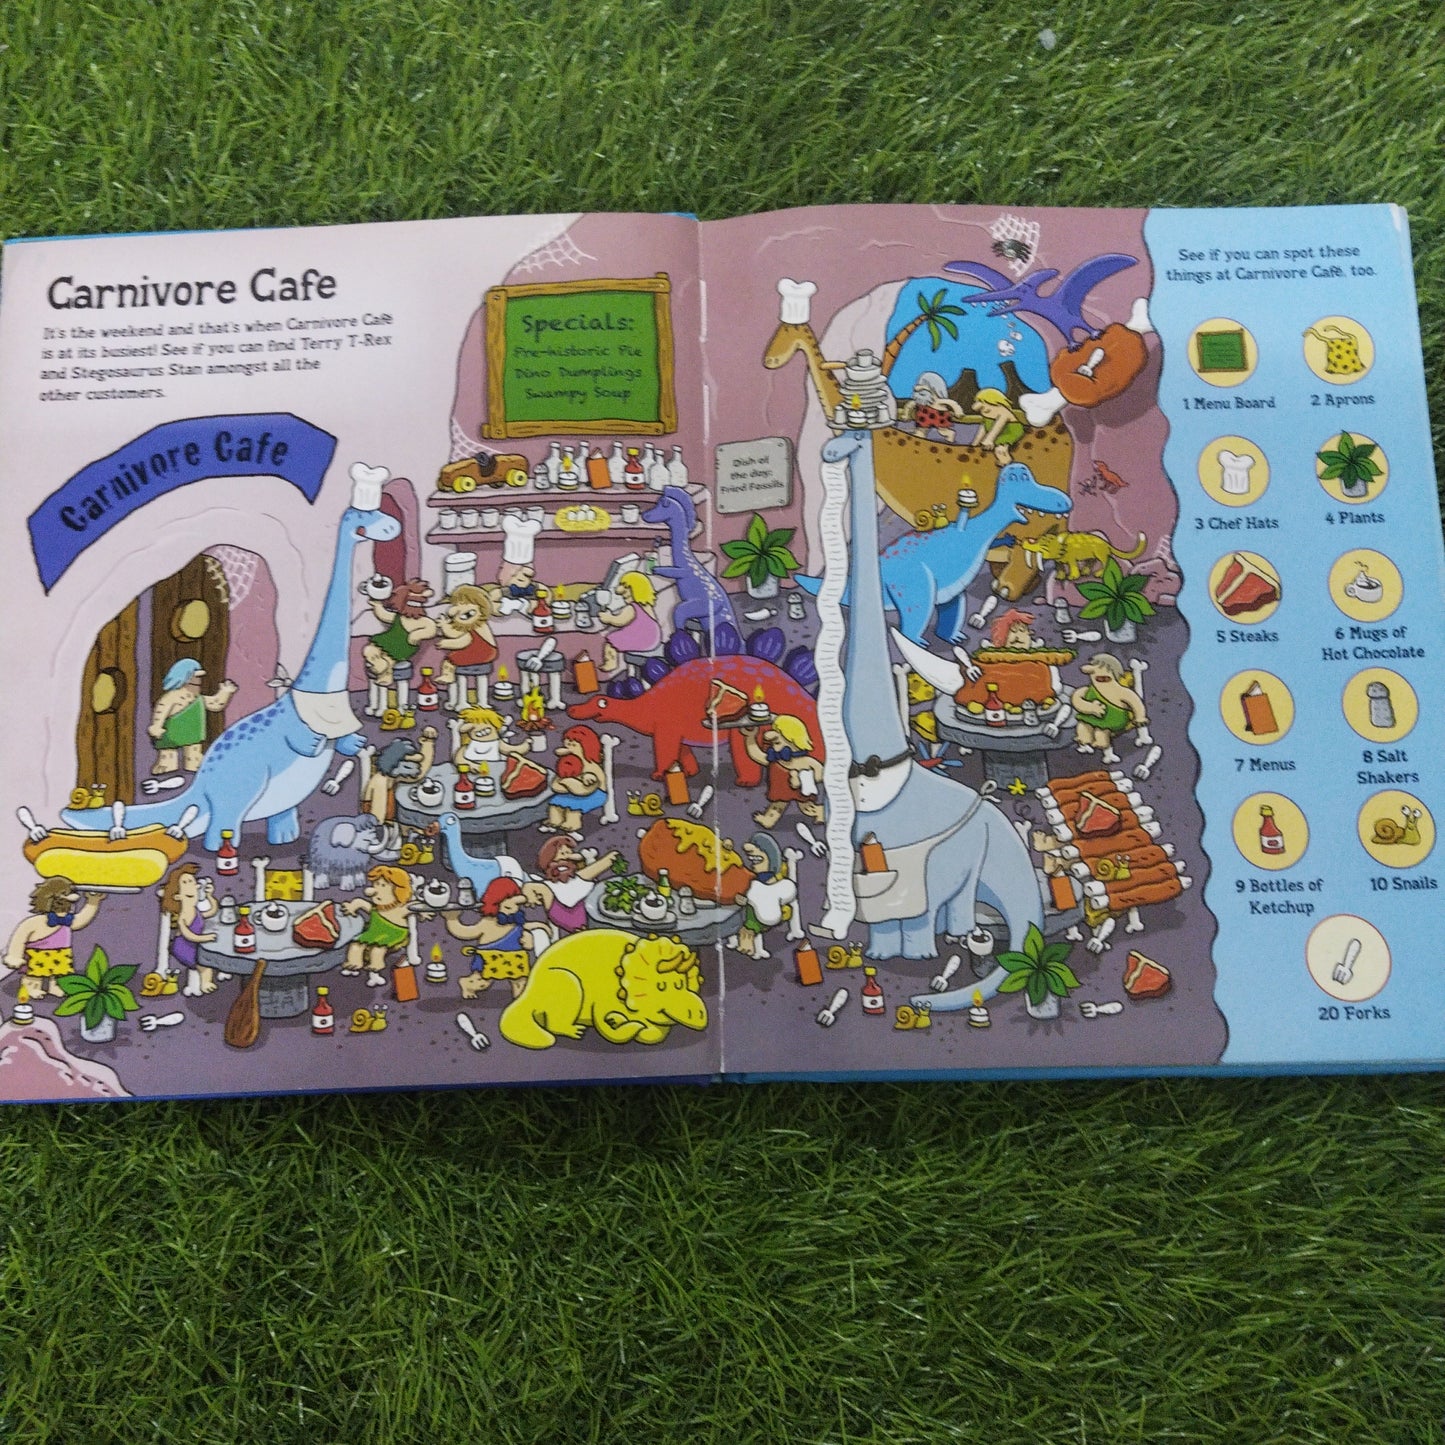 Can you find… 1001 Dinosaurs and other things ?